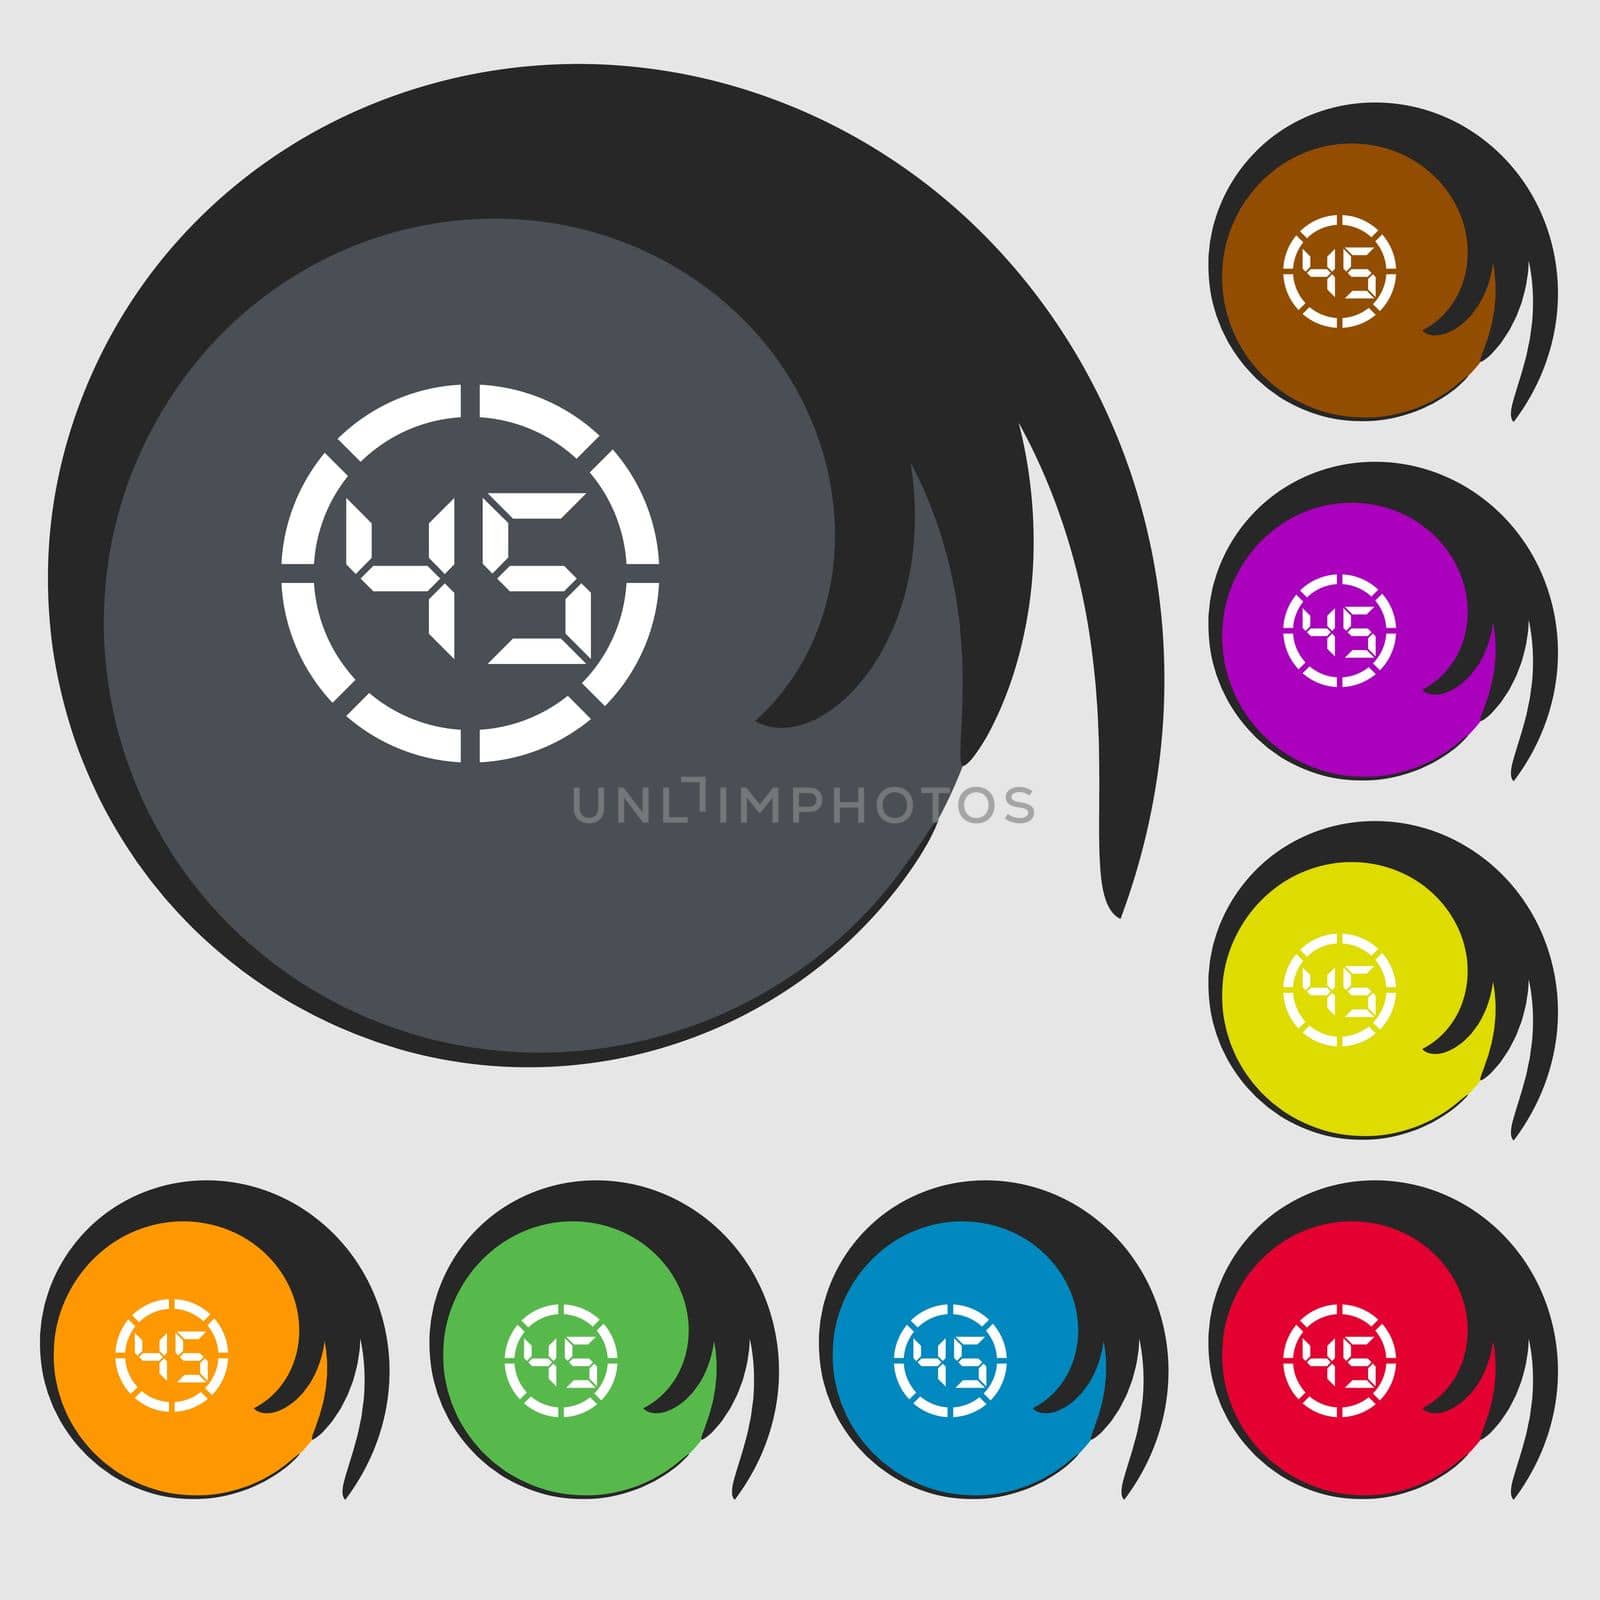 45 second stopwatch icon sign. Symbols on eight colored buttons. illustration